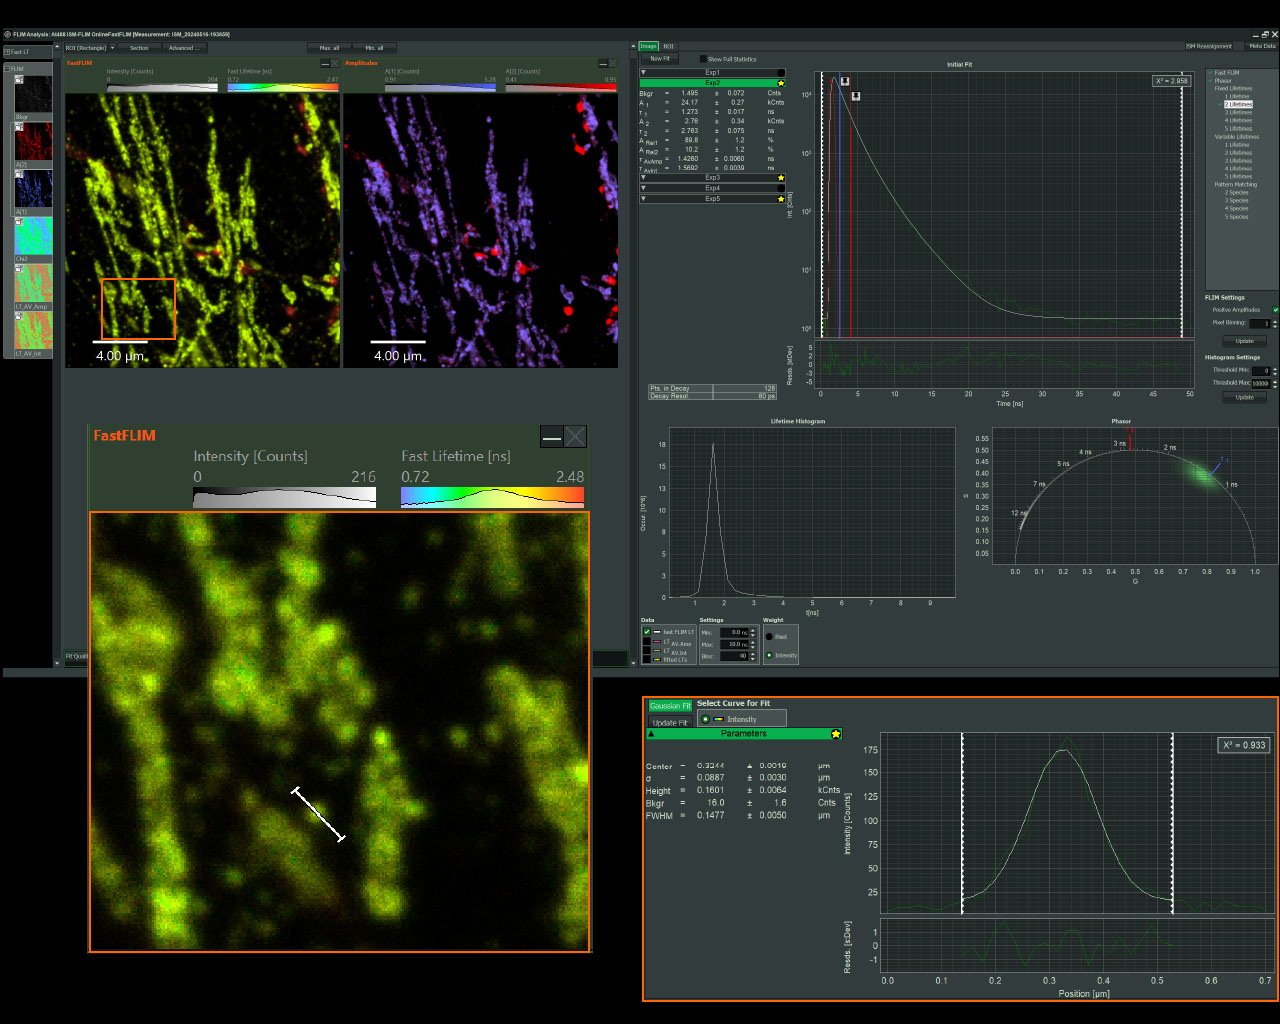 Screenshot of the Luminosa Software showing ISM and FLIM measurements